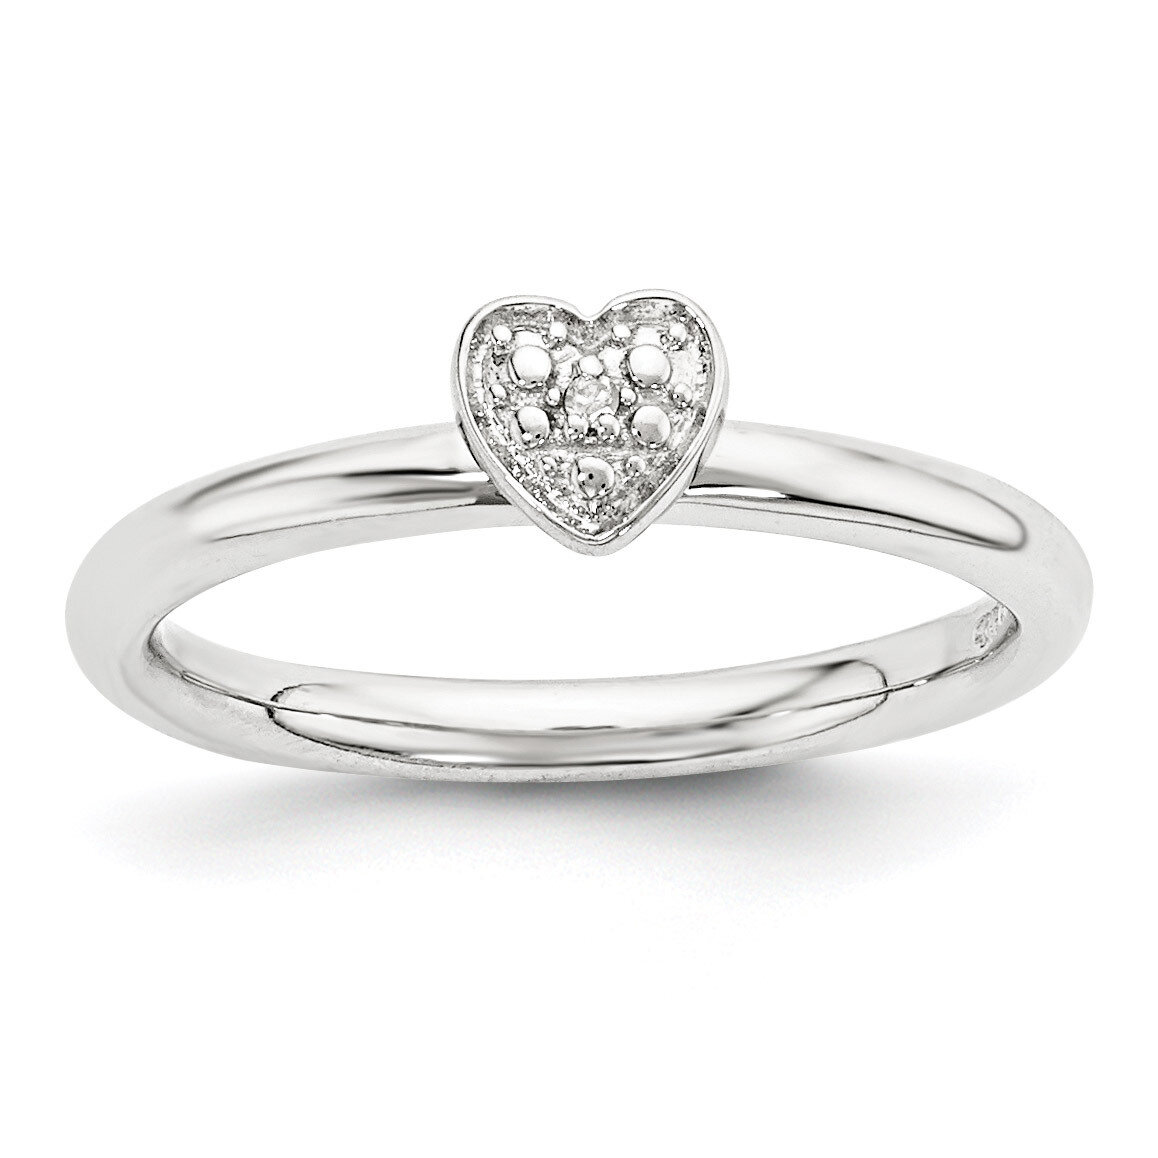 Diamond Heart Ring Sterling Silver Polished QSK1867